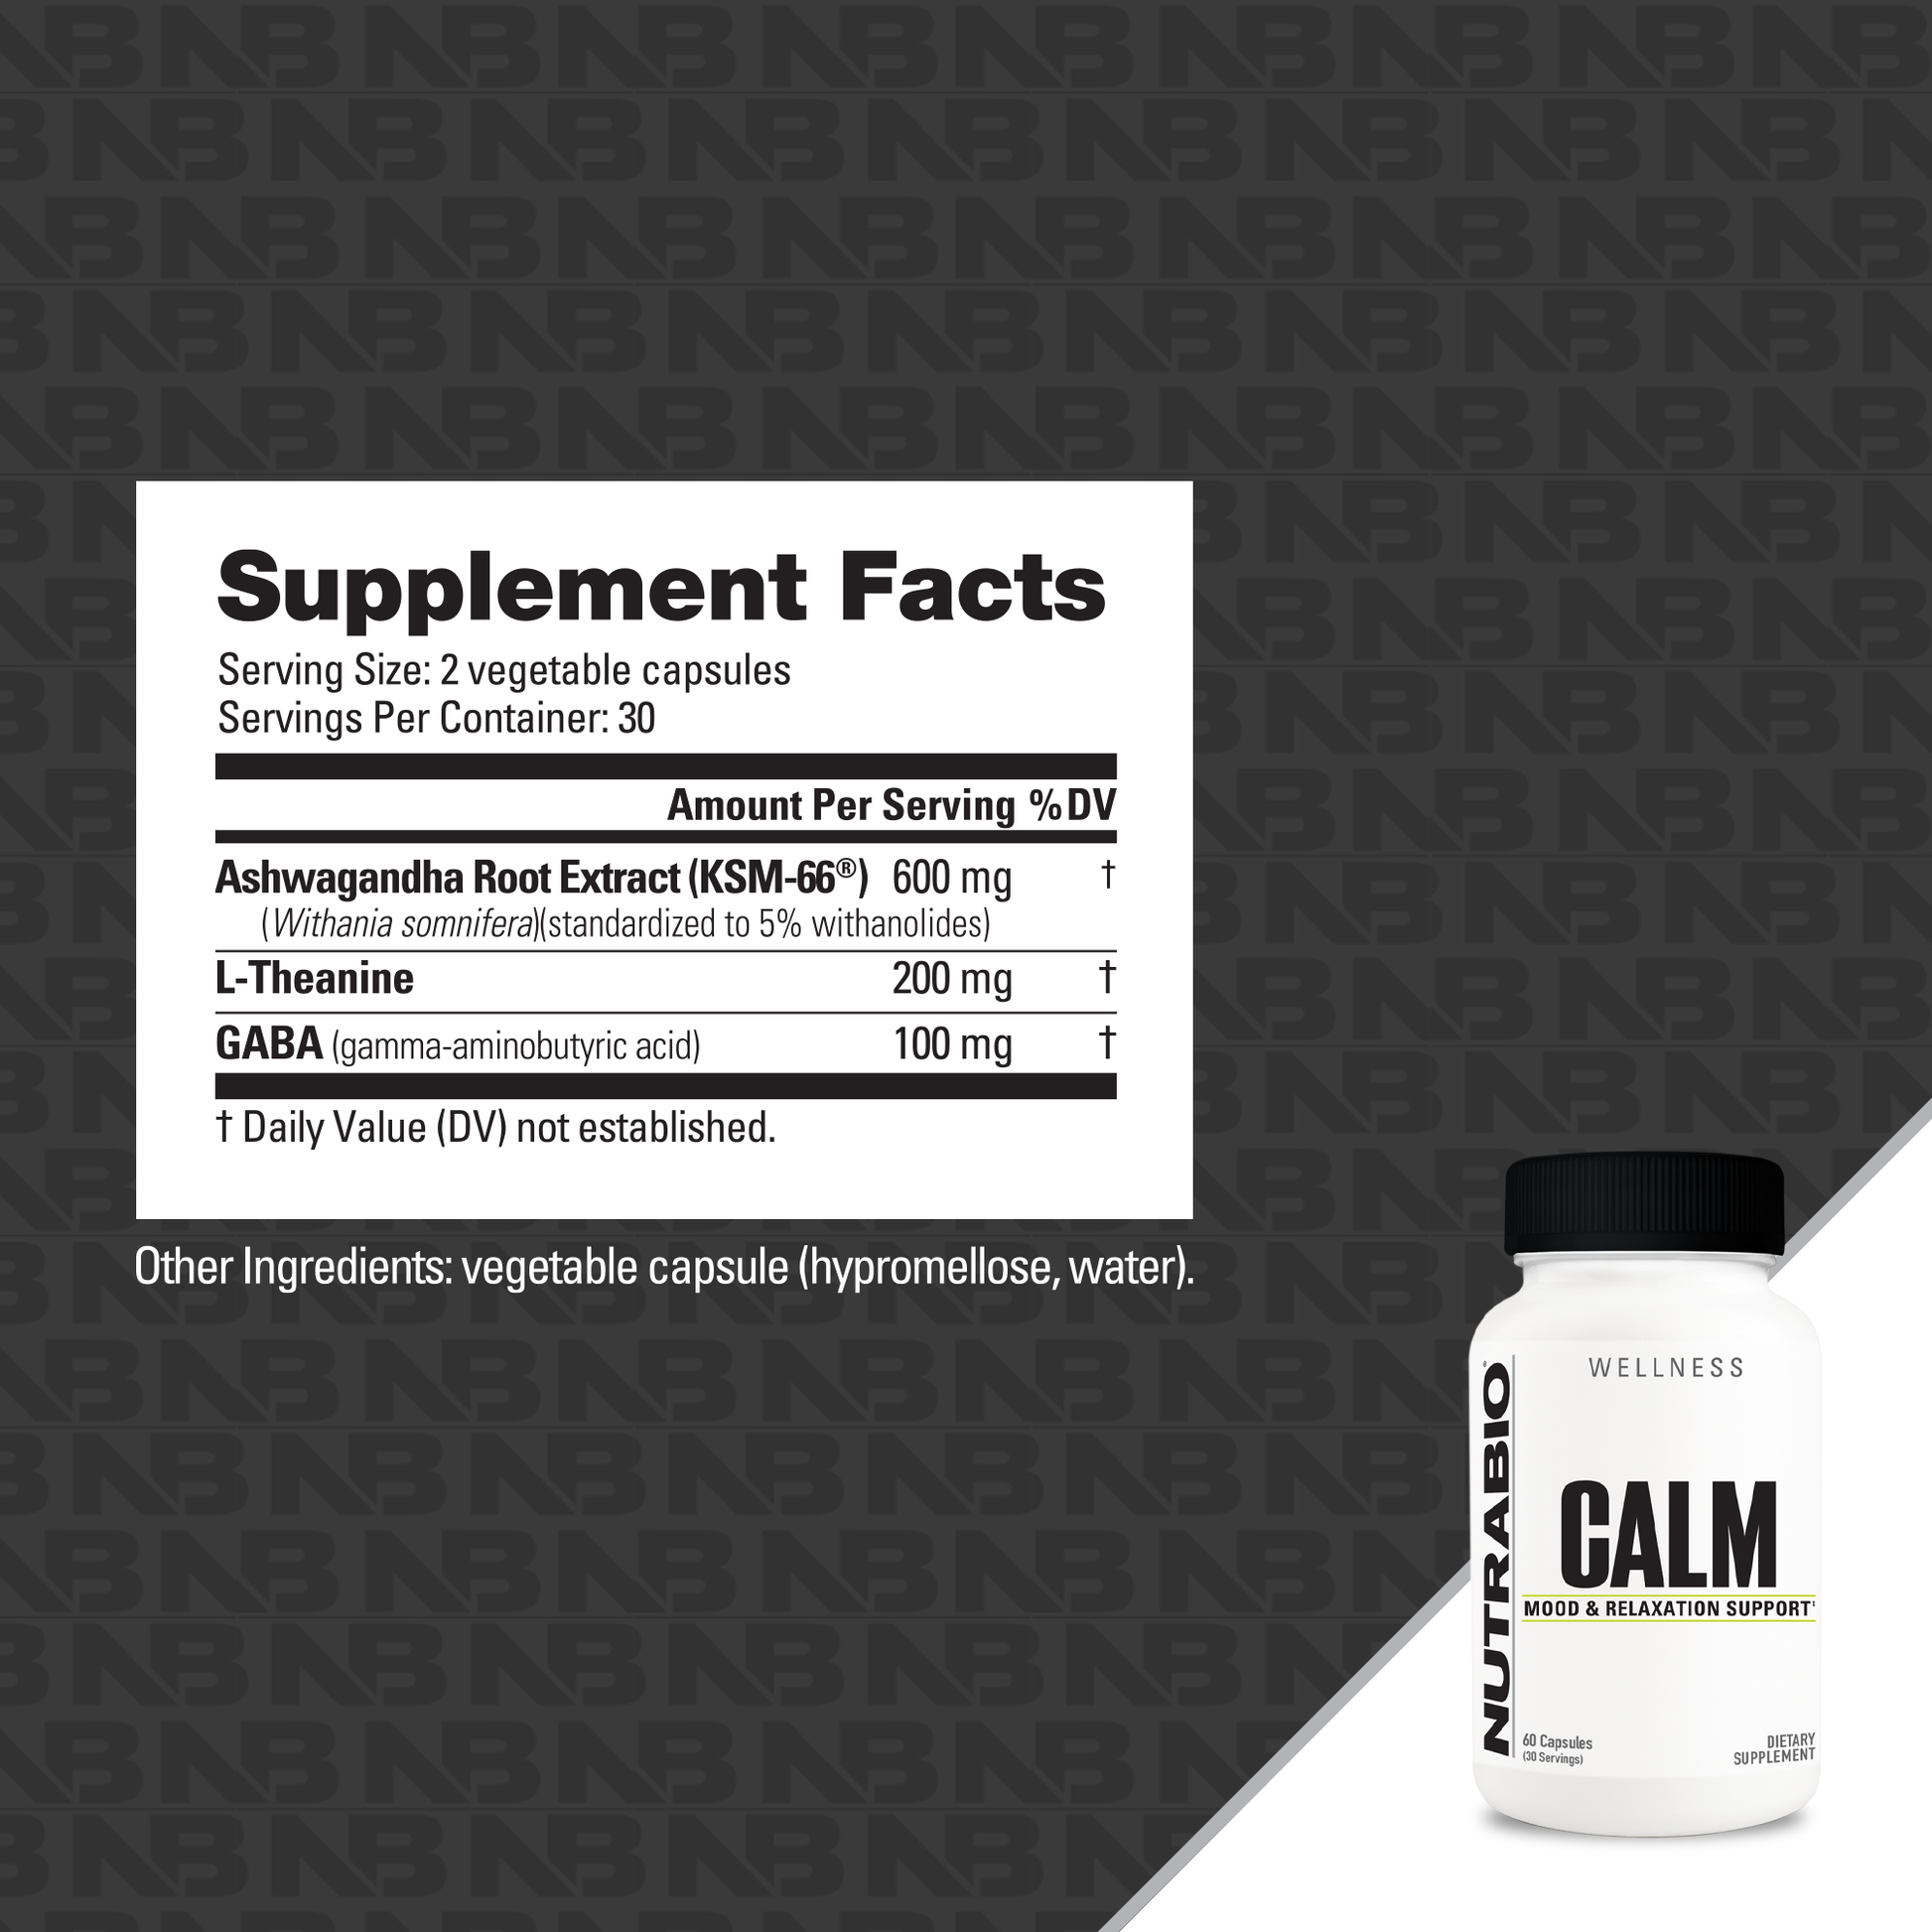 Calm Supplement Facts Panel